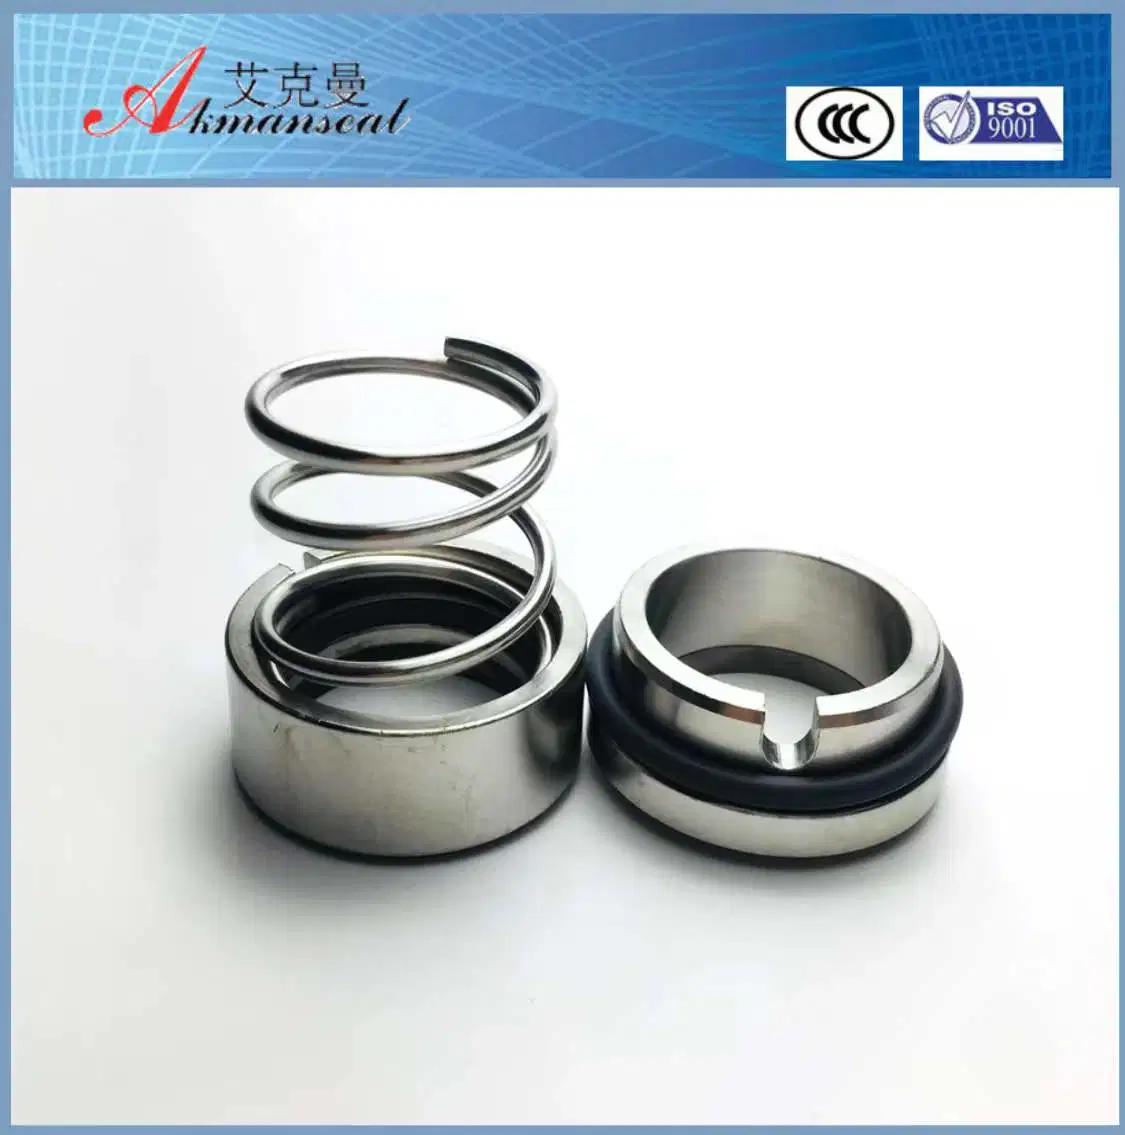 M37G-55mm/G9 Mechanical Seal M37g Seals 68mm with G9 Stationary Seat for Water Pump (Material: TC/TC/VIT)